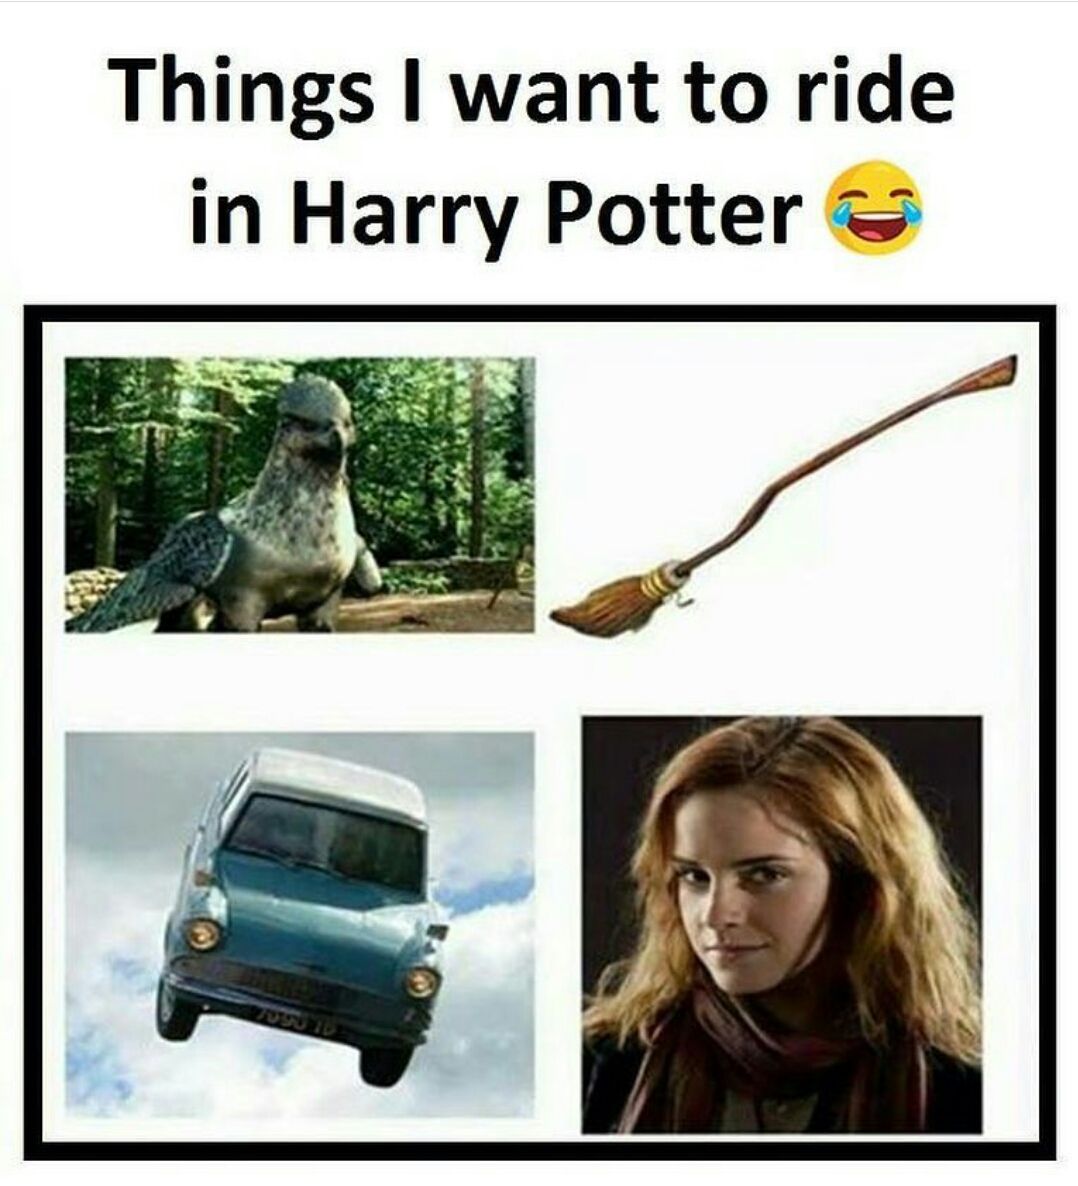 Things I want to ride in Harry Potter...